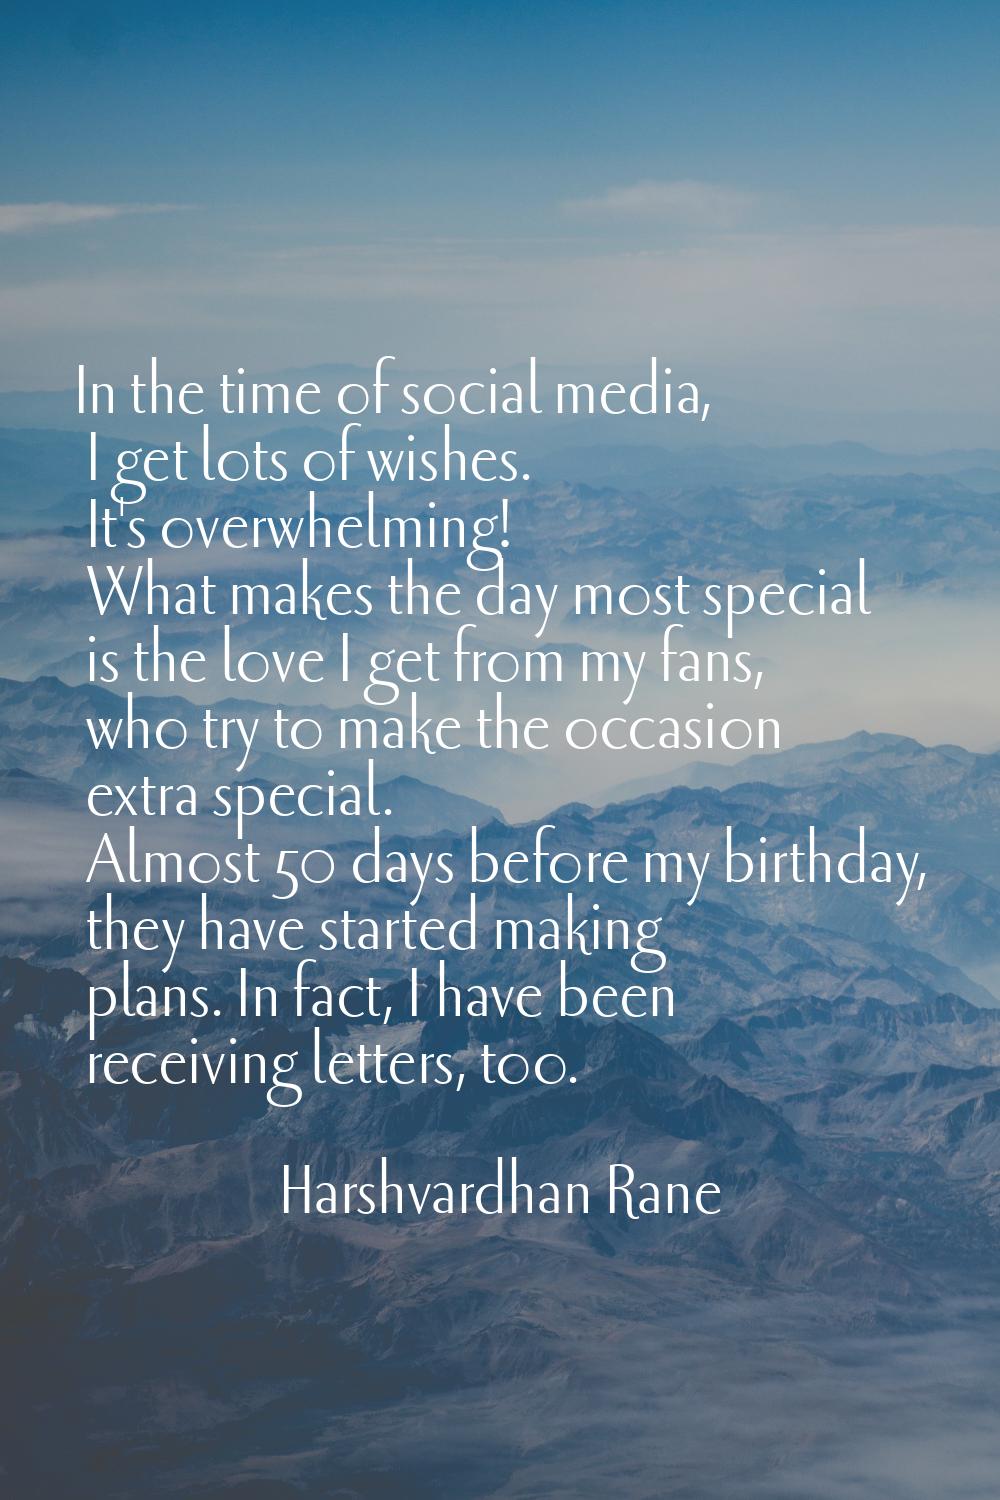 In the time of social media, I get lots of wishes. It's overwhelming! What makes the day most speci